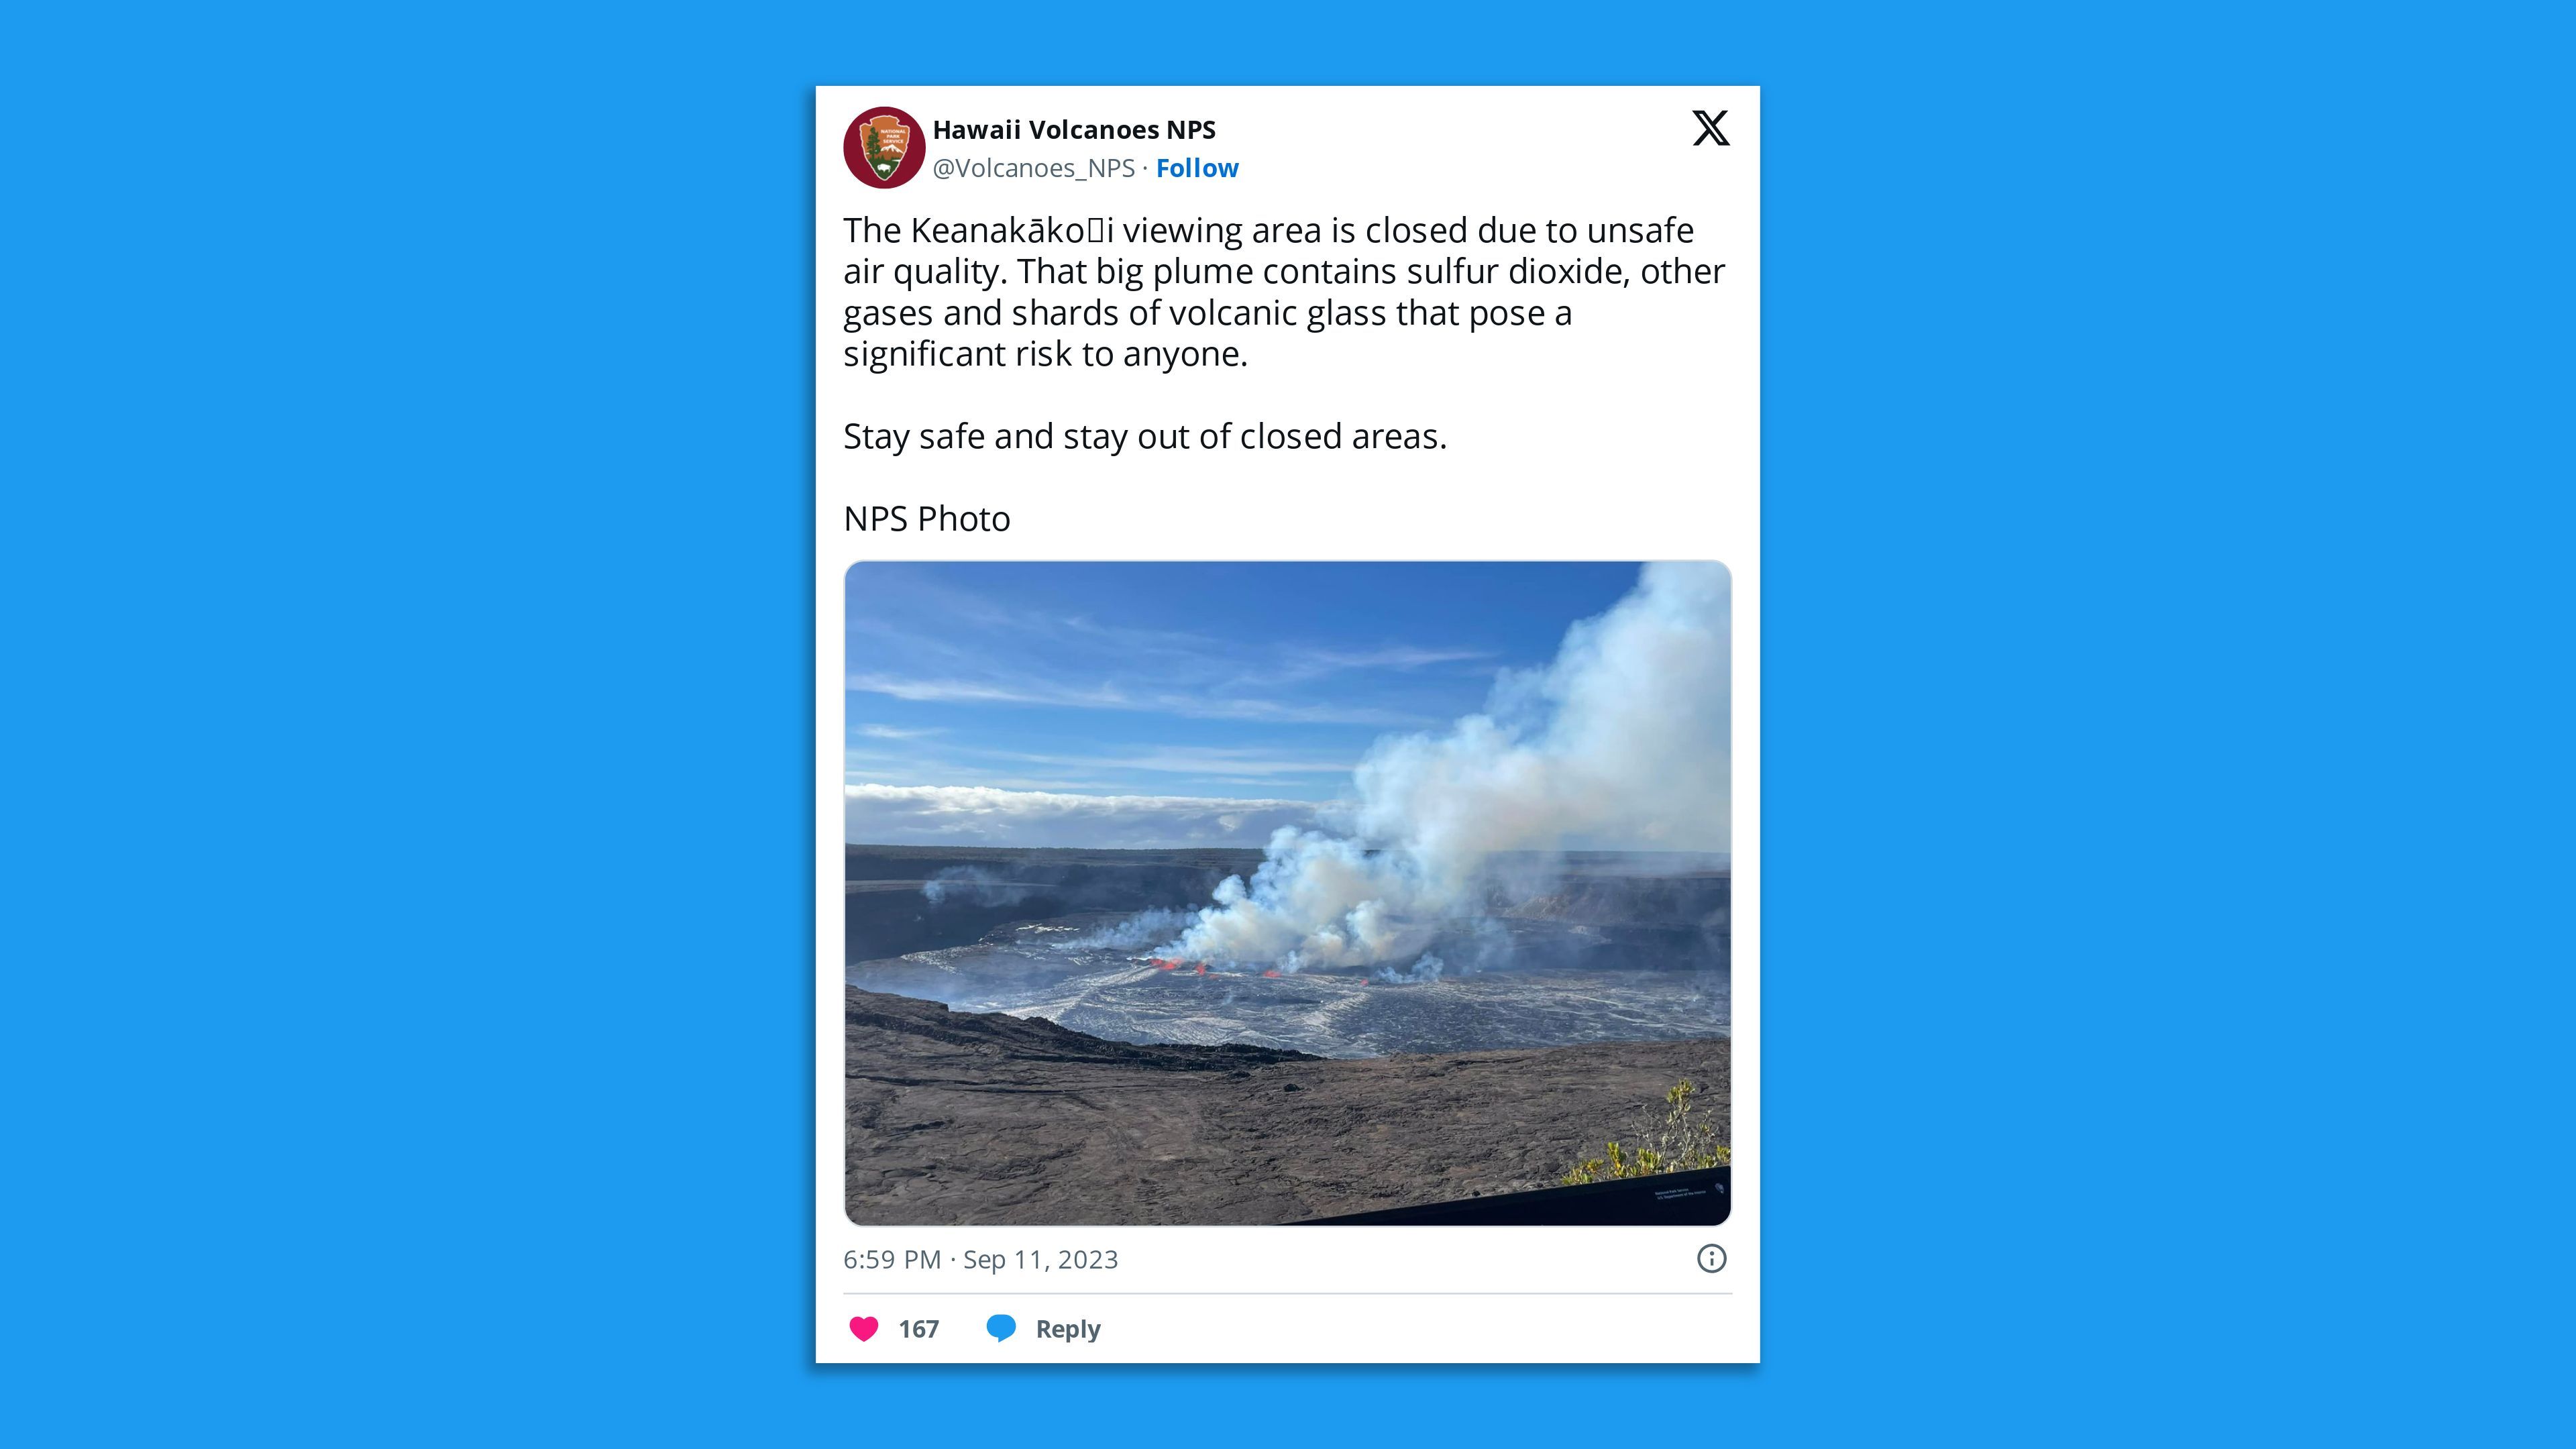 A screenshot of a Hawaii Volcanoes NPS tweet showing the Kilauea volcano erupting, with the comment: "The Keanakākoʻi viewing area is closed due to unsafe air quality. That big plume contains sulfur dioxide, other gases and shards of volcanic glass that pose a significant risk to anyone.   Stay safe and stay out of closed areas."